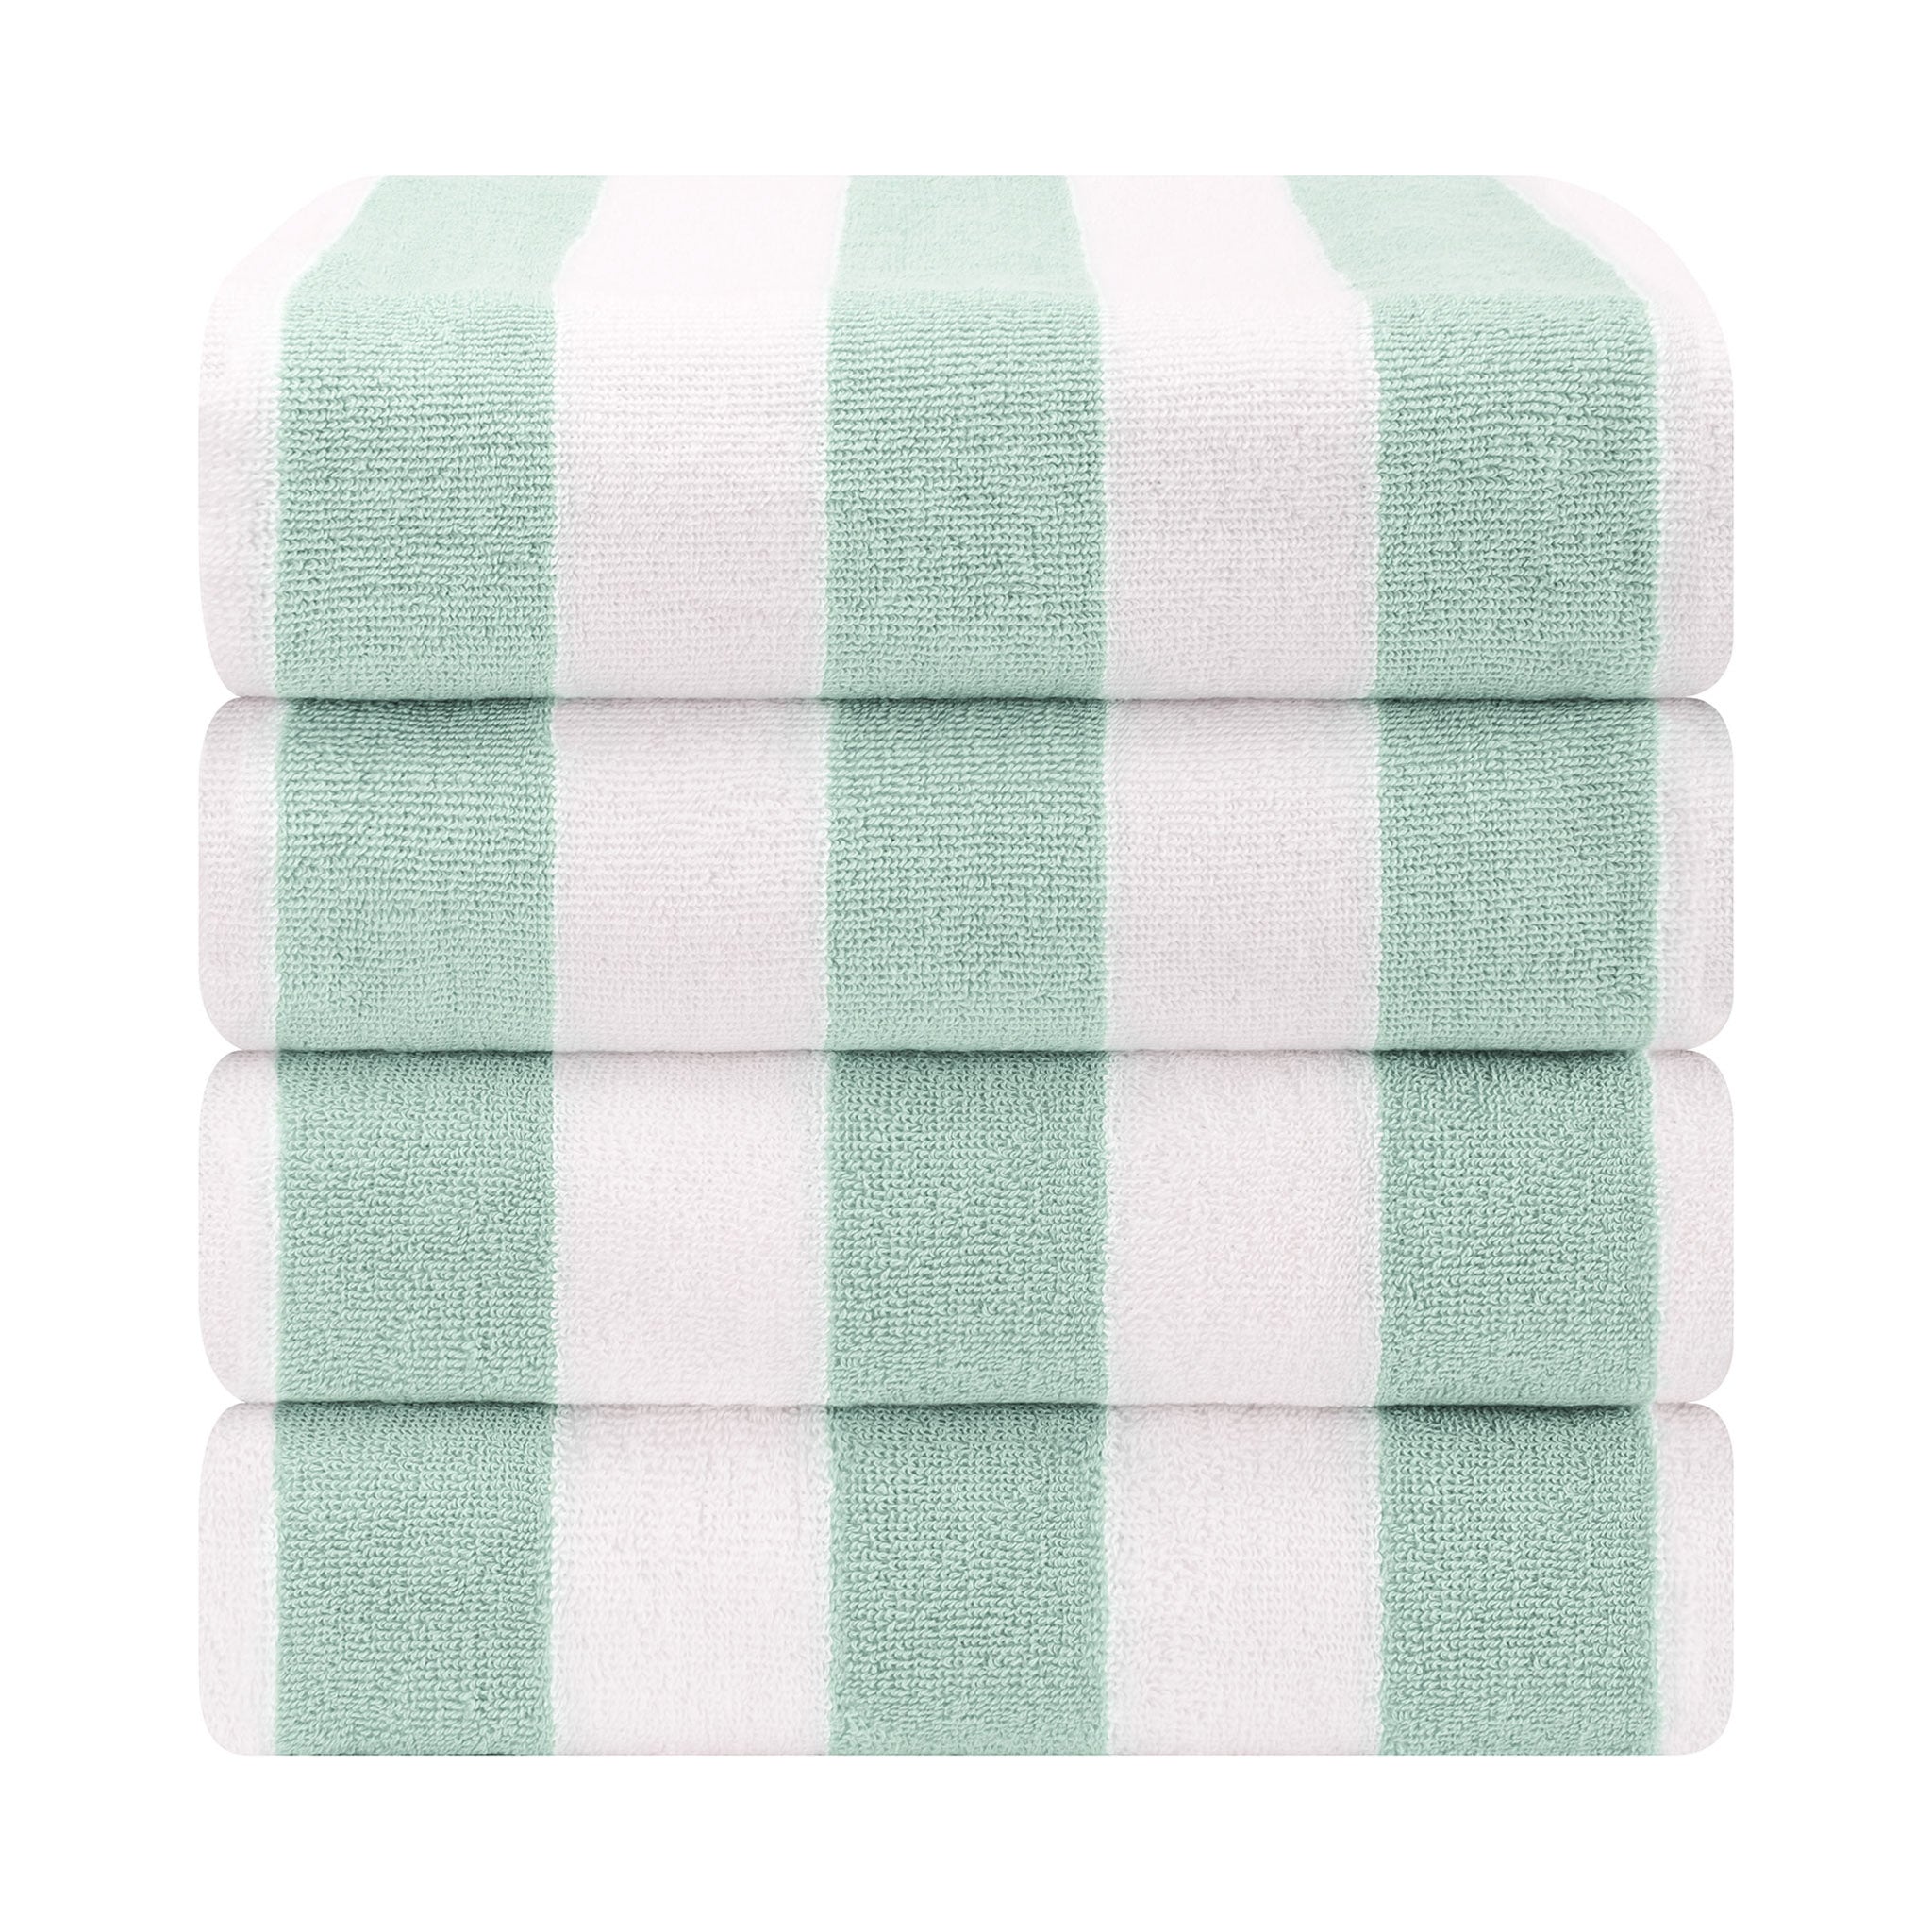 American Soft Linen 100% Cotton 4 Pack Beach Towels Cabana Striped Pool Towels -mint-2